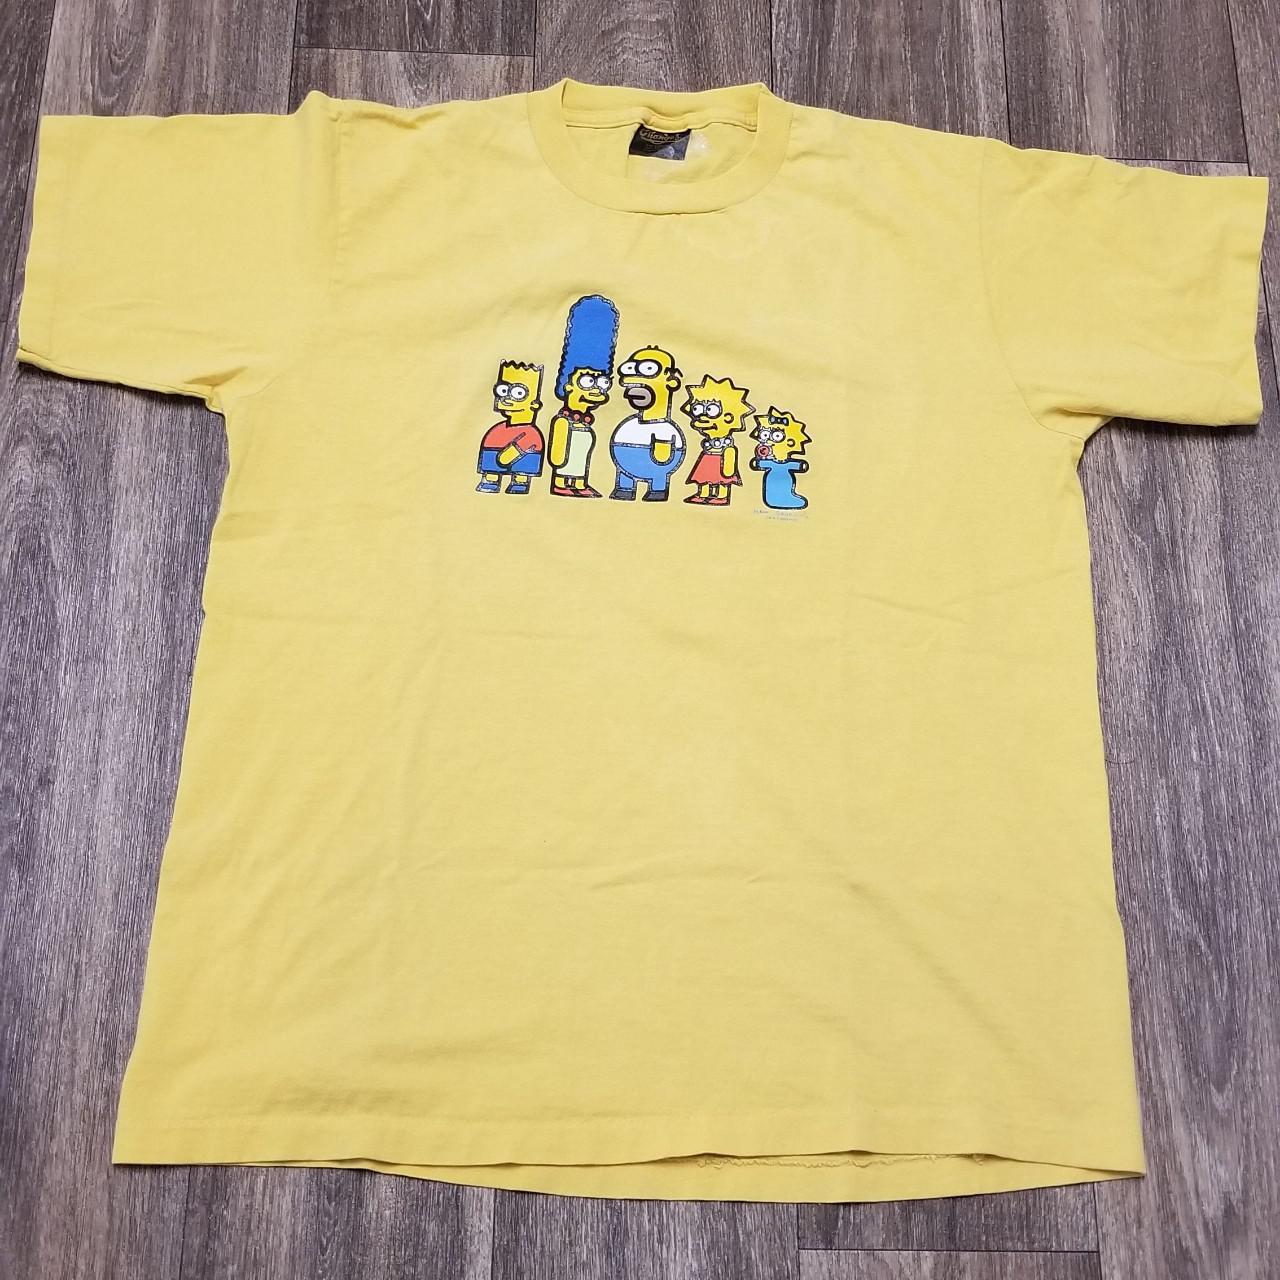 Product Image 1 - nearly vintage 2002 simpsons
slight discoloration